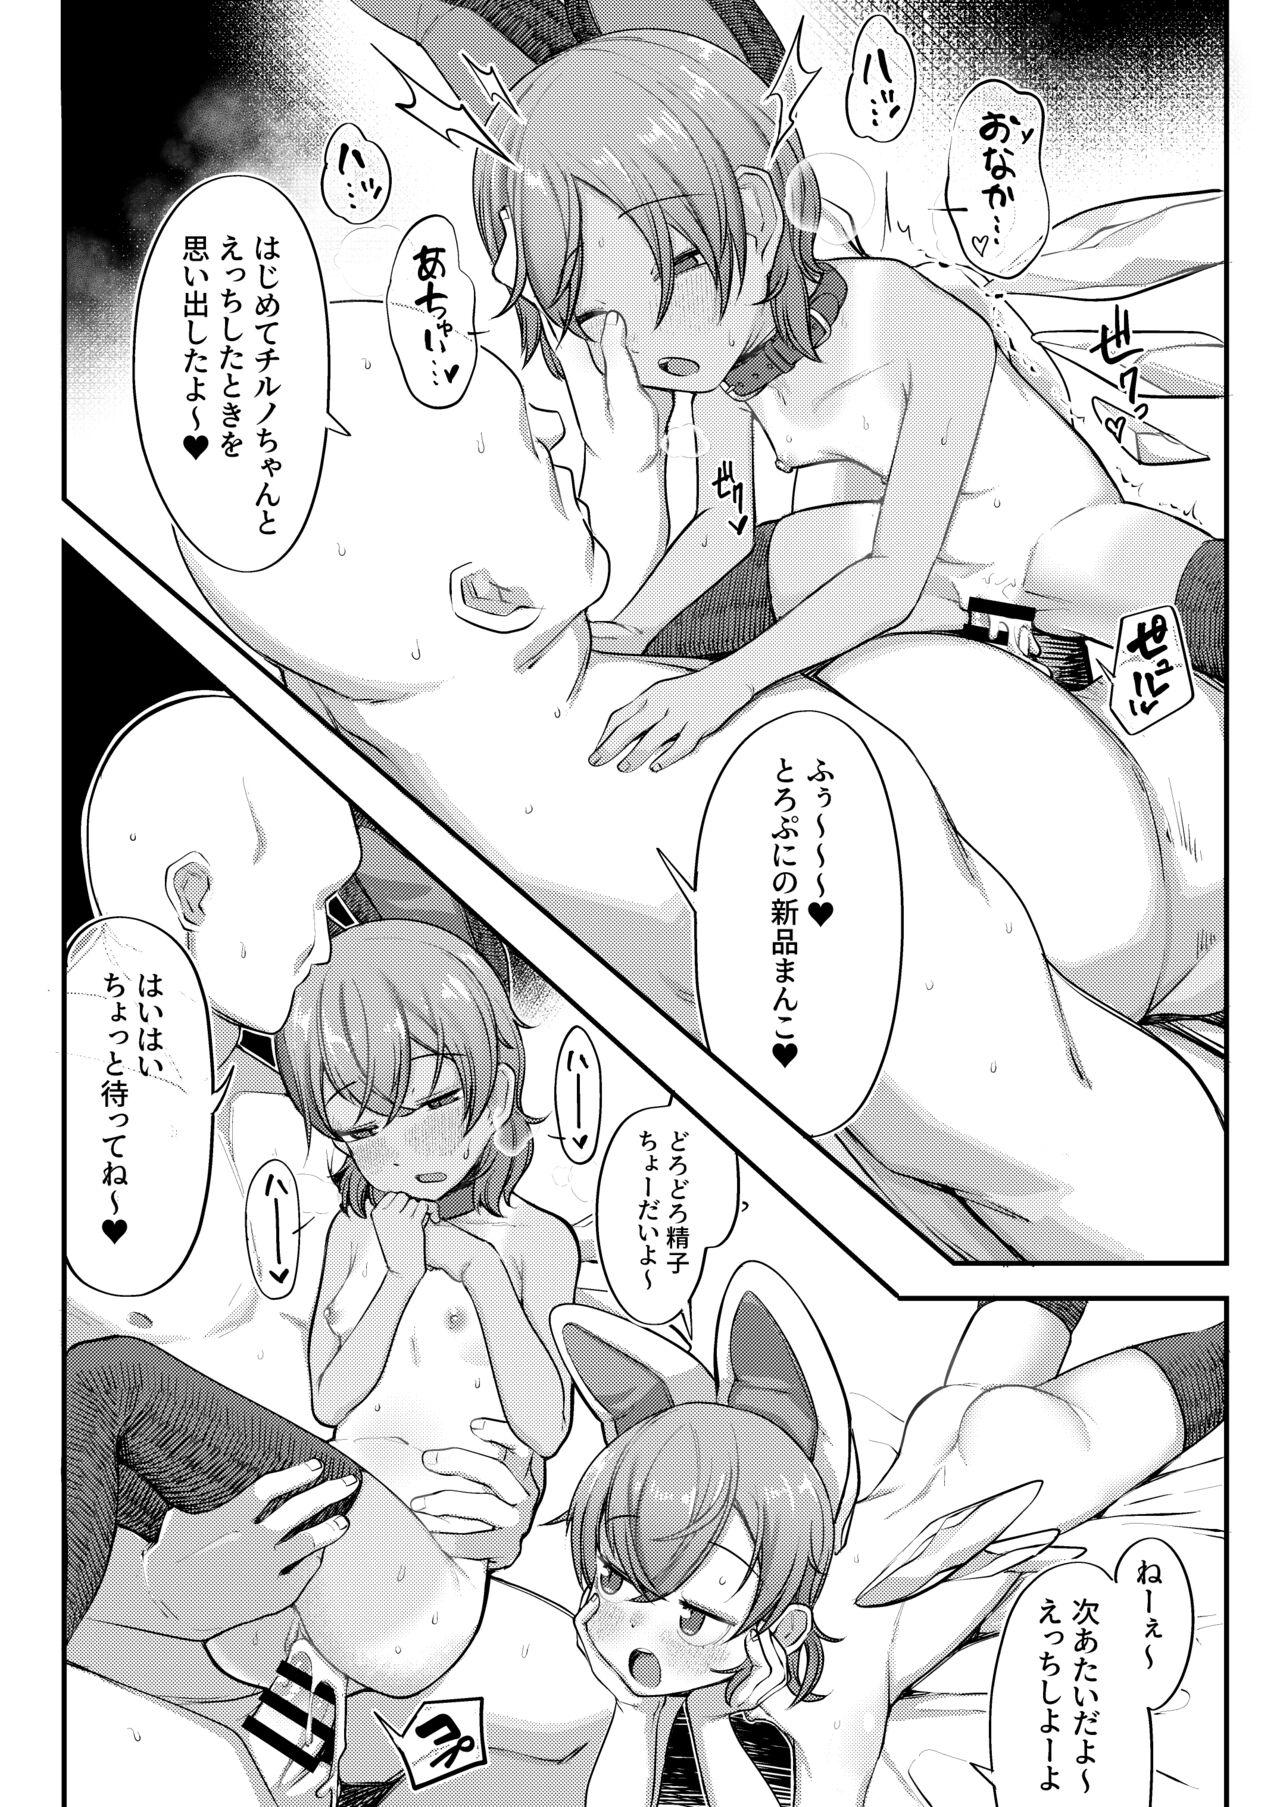 Butt Plug Cirno to Cirno - Touhou project Gaycum - Page 12